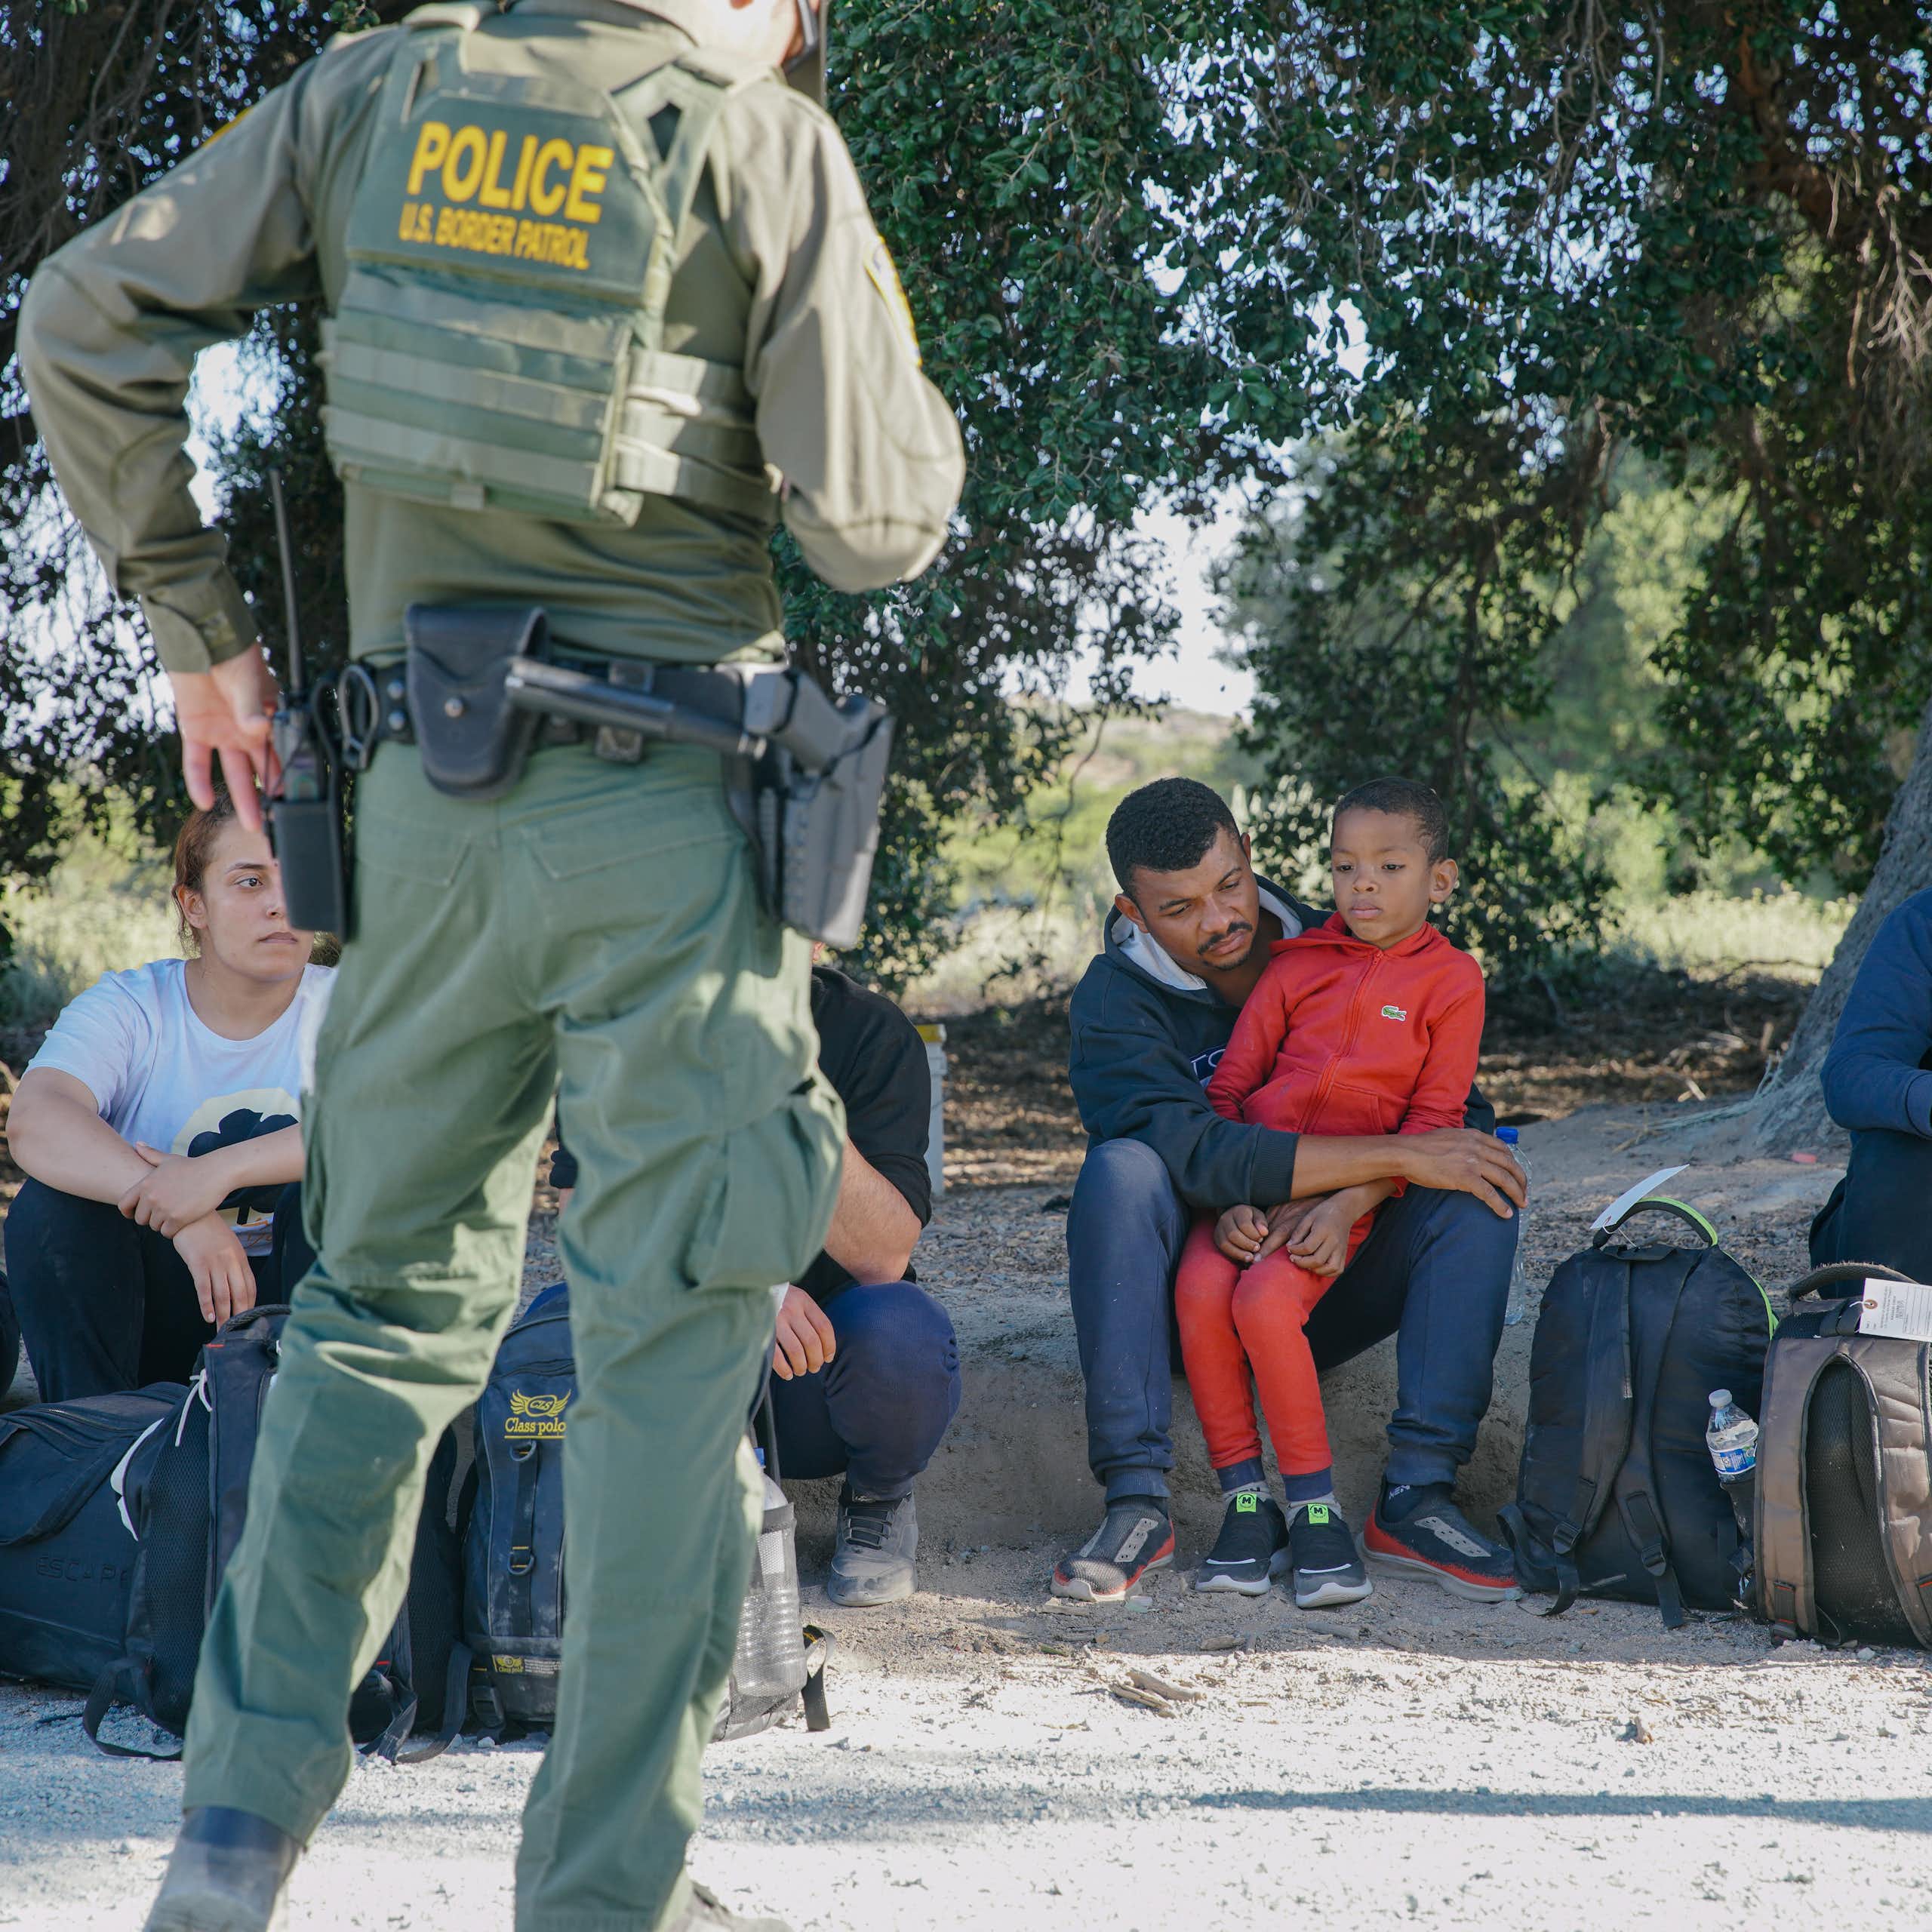 A row of people sit next to backpacks on the ground, as two people wearing green uniforms with the word 'police' on it in yellow stand in front of them.